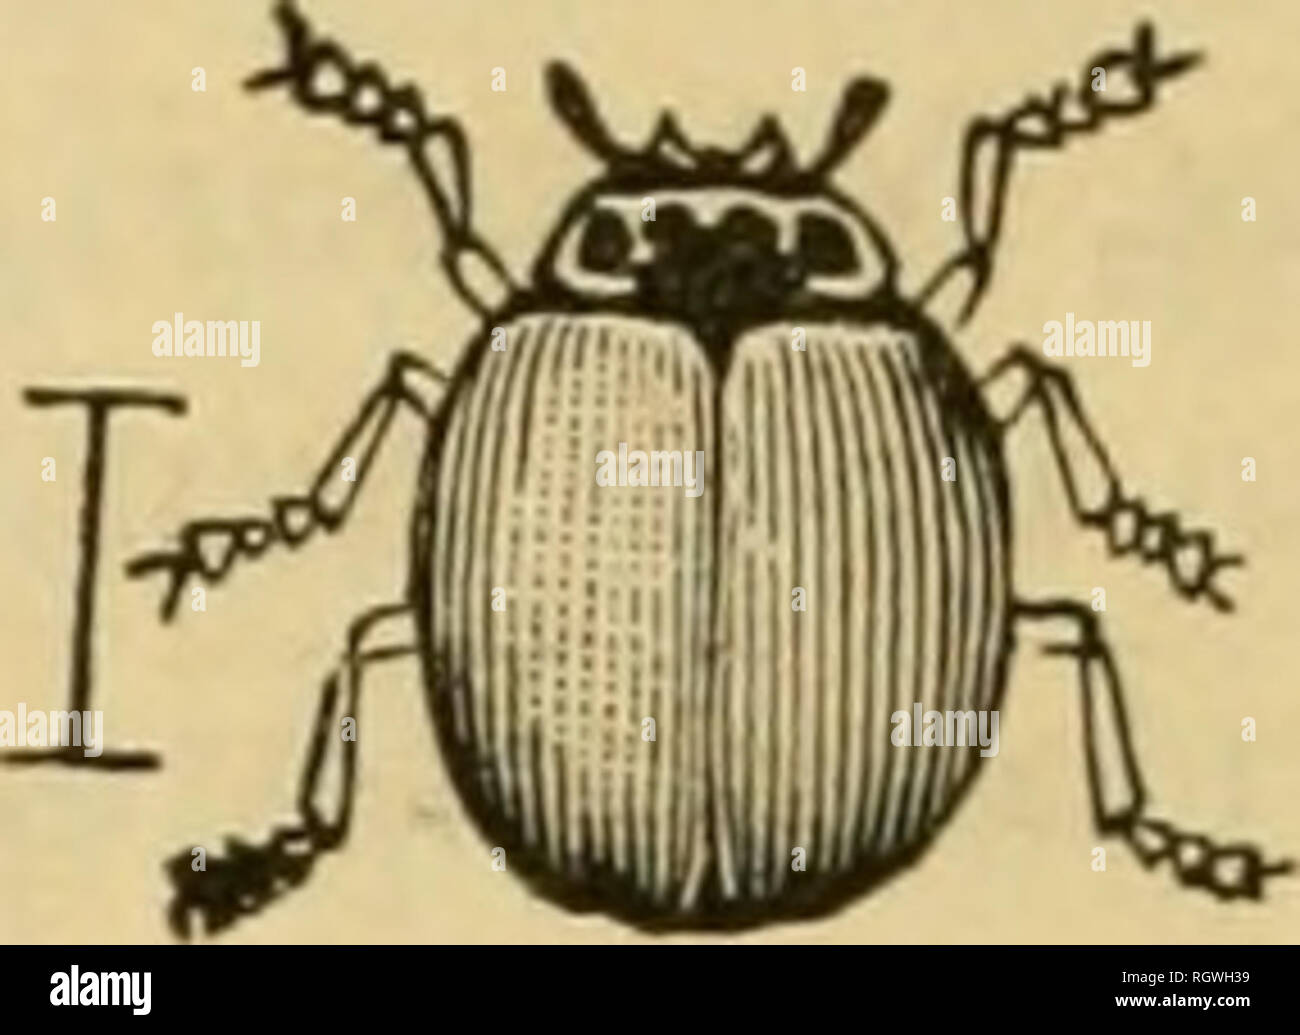 . Bulletin. Insects; Insect pests; Entomology; Insects; Insect pests; Entomology. 22 THK CHINCH BUG. Mr. Walsh in 1861 meutioued four Ladybirds, viz, the Spotted Ladybird {Hipjwdamia onaculatajFig. 4), the Trim Ladybird {CoccincUa munday now called Cycloneda sanguinea, Fig. 5), and two species of Scymnus. lu [Fig. 4.] [Fig. 5.]. Spotted Ladybird. Trim Ladybird. 1882 Prof. Forbes found five species of Ladybirds (including the first two mentioned by Walsh) extremely abundant on corn (15 or 20 to a hill) which was infested by hosts of Chinch Bugs. The contents of the stomachs of a few specimens o Stock Photo